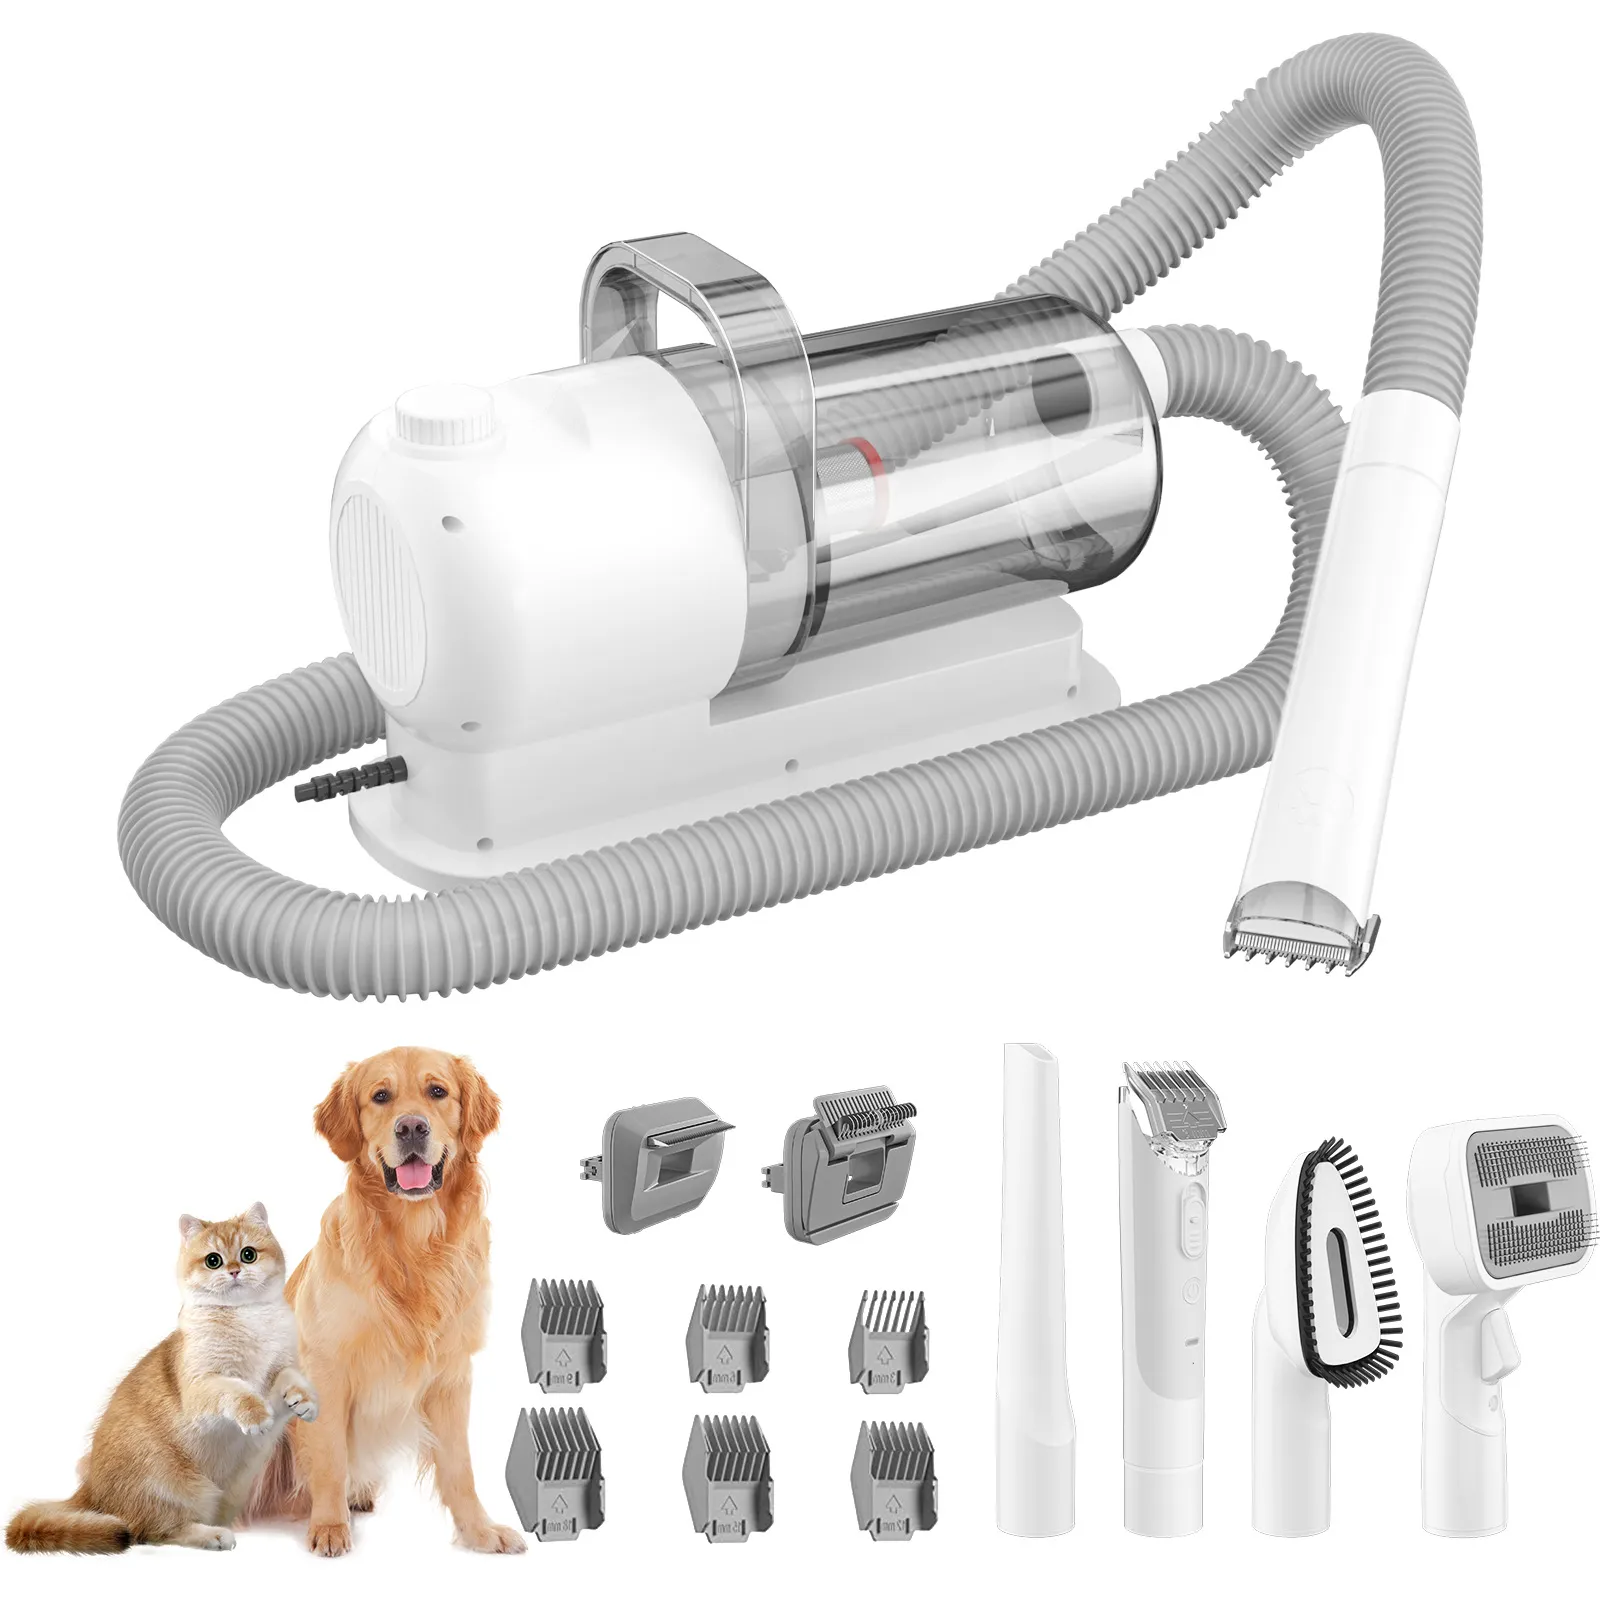 YUEXUAN Designer Professional Pet Care Vacuum Cleaner with 2.5L Capacity All-in-one Dog Cat Pet Hair Clipper Set Perfect for Pet Hair, White Pet Grooming Kit Animals